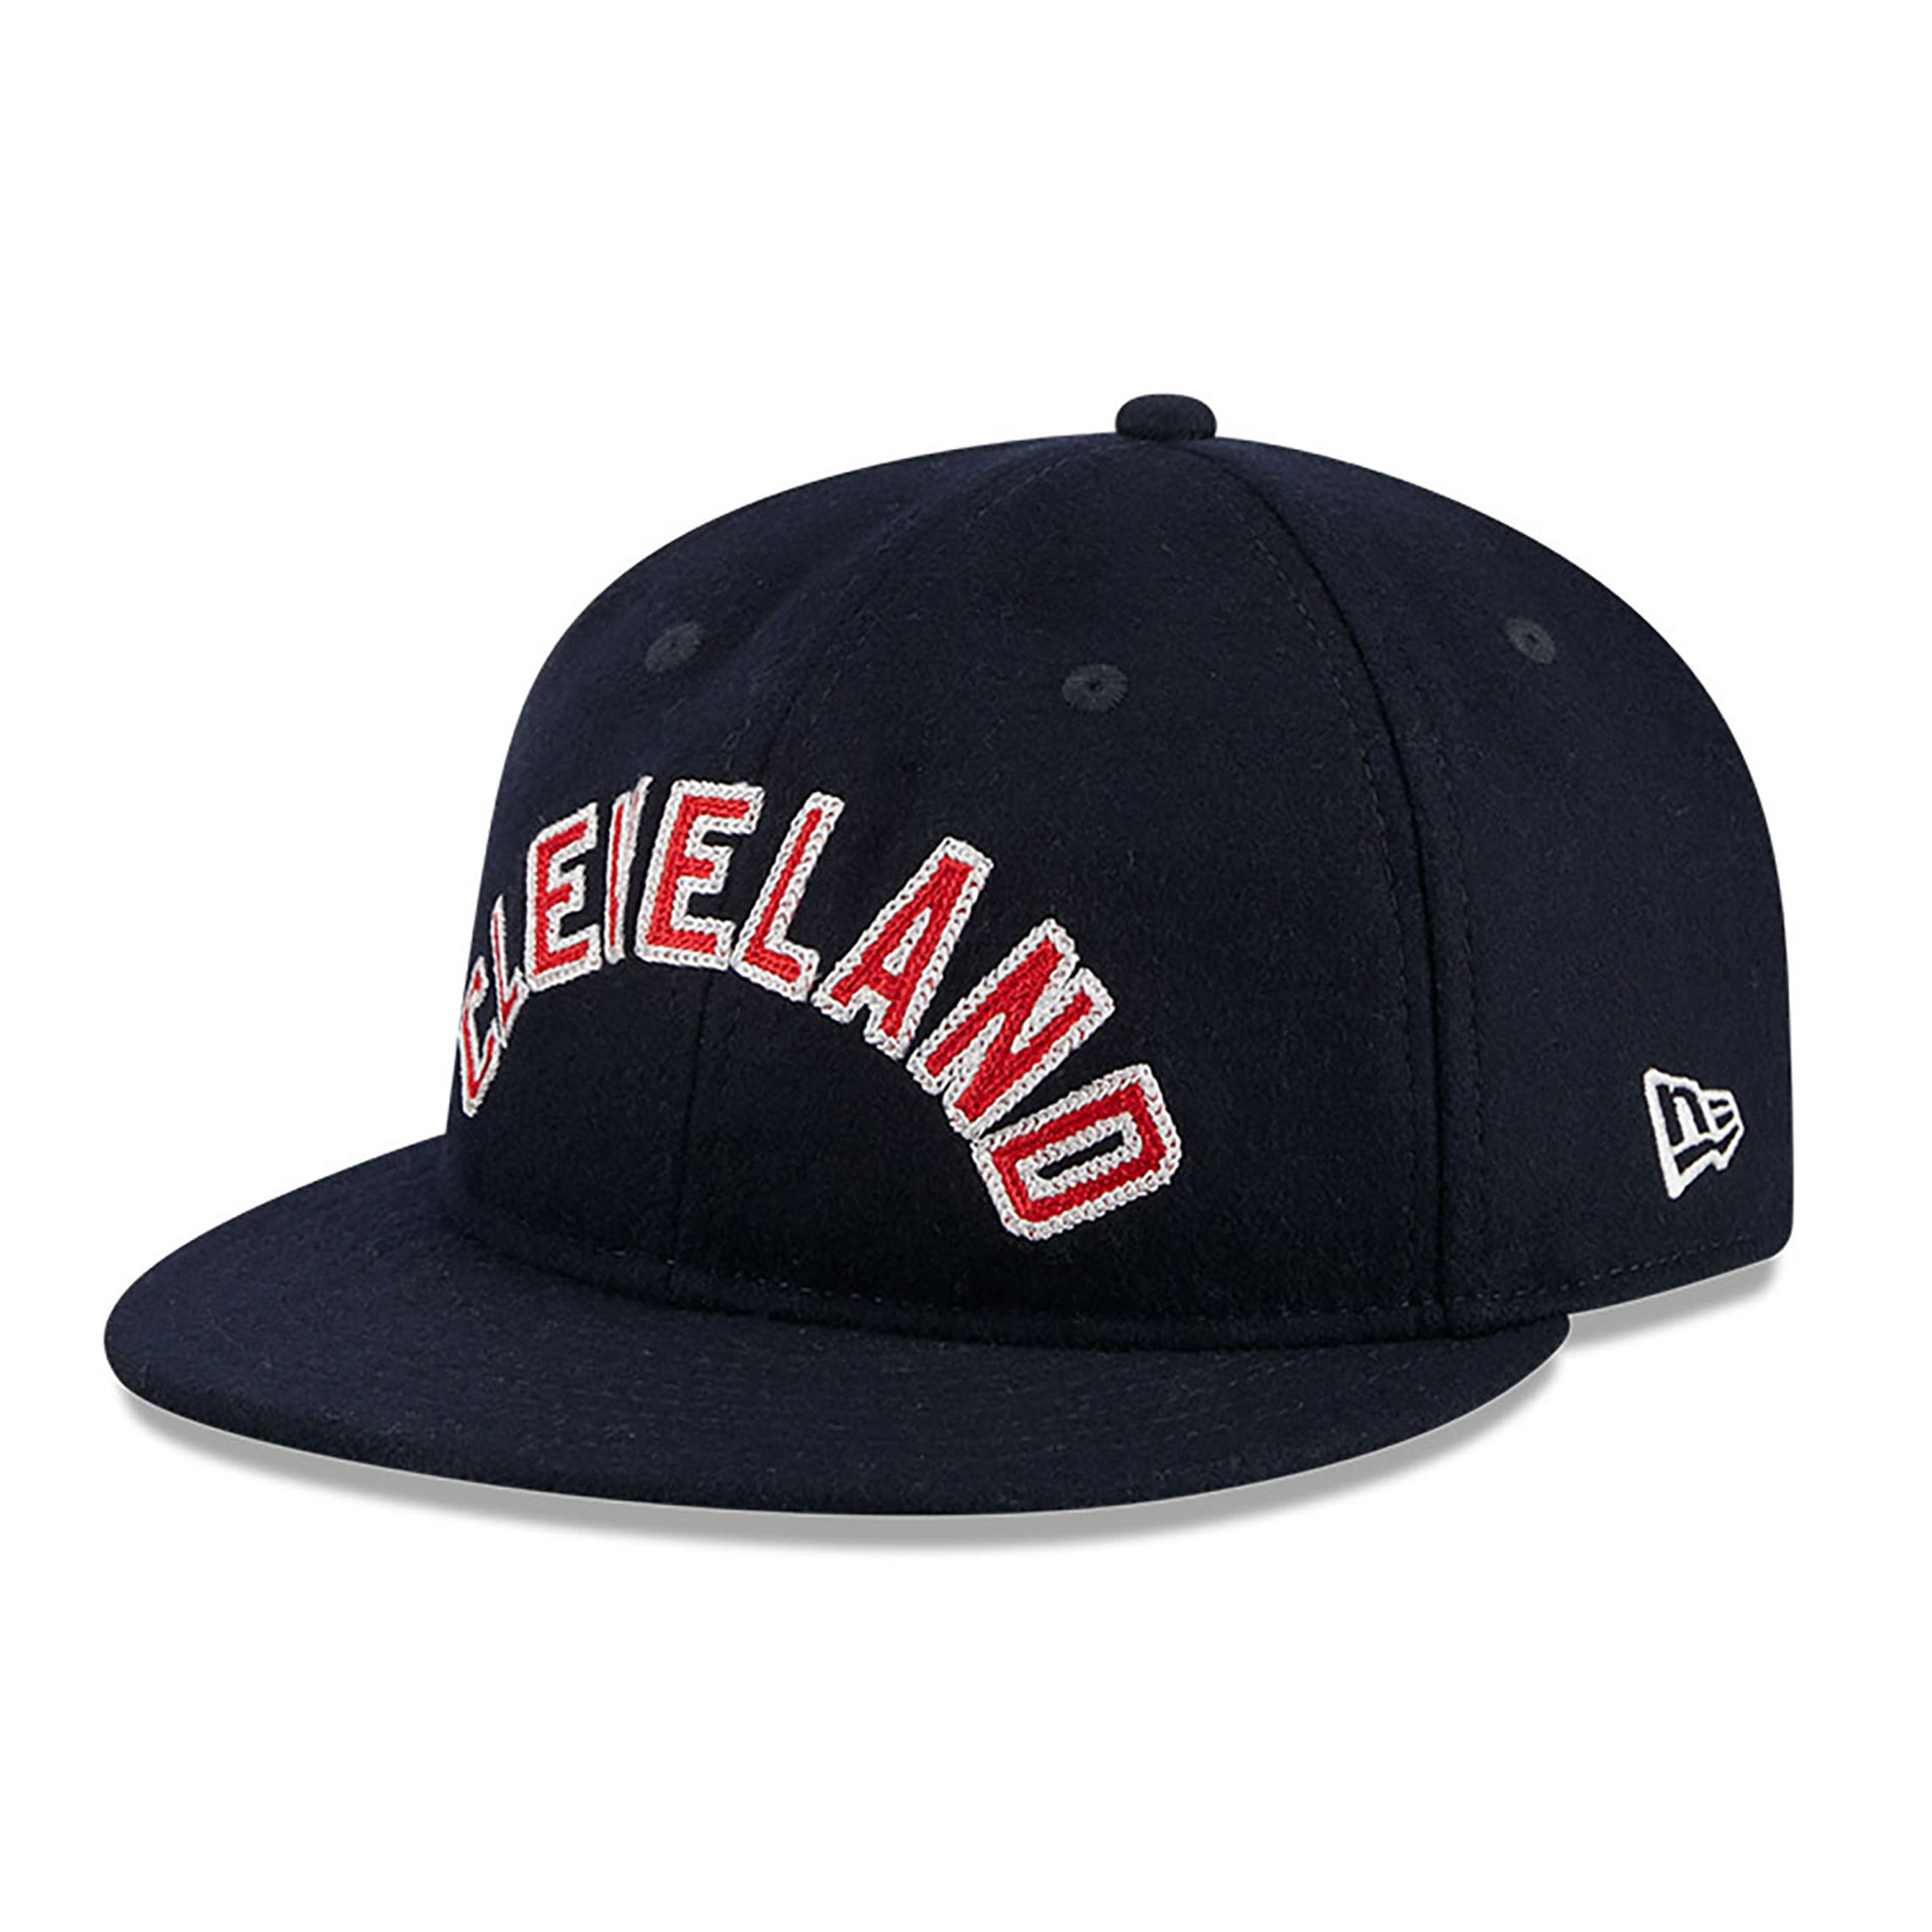 Cleveland Indians Melton Wool Navy Retro Crown 9FIFTY Strapback Cap